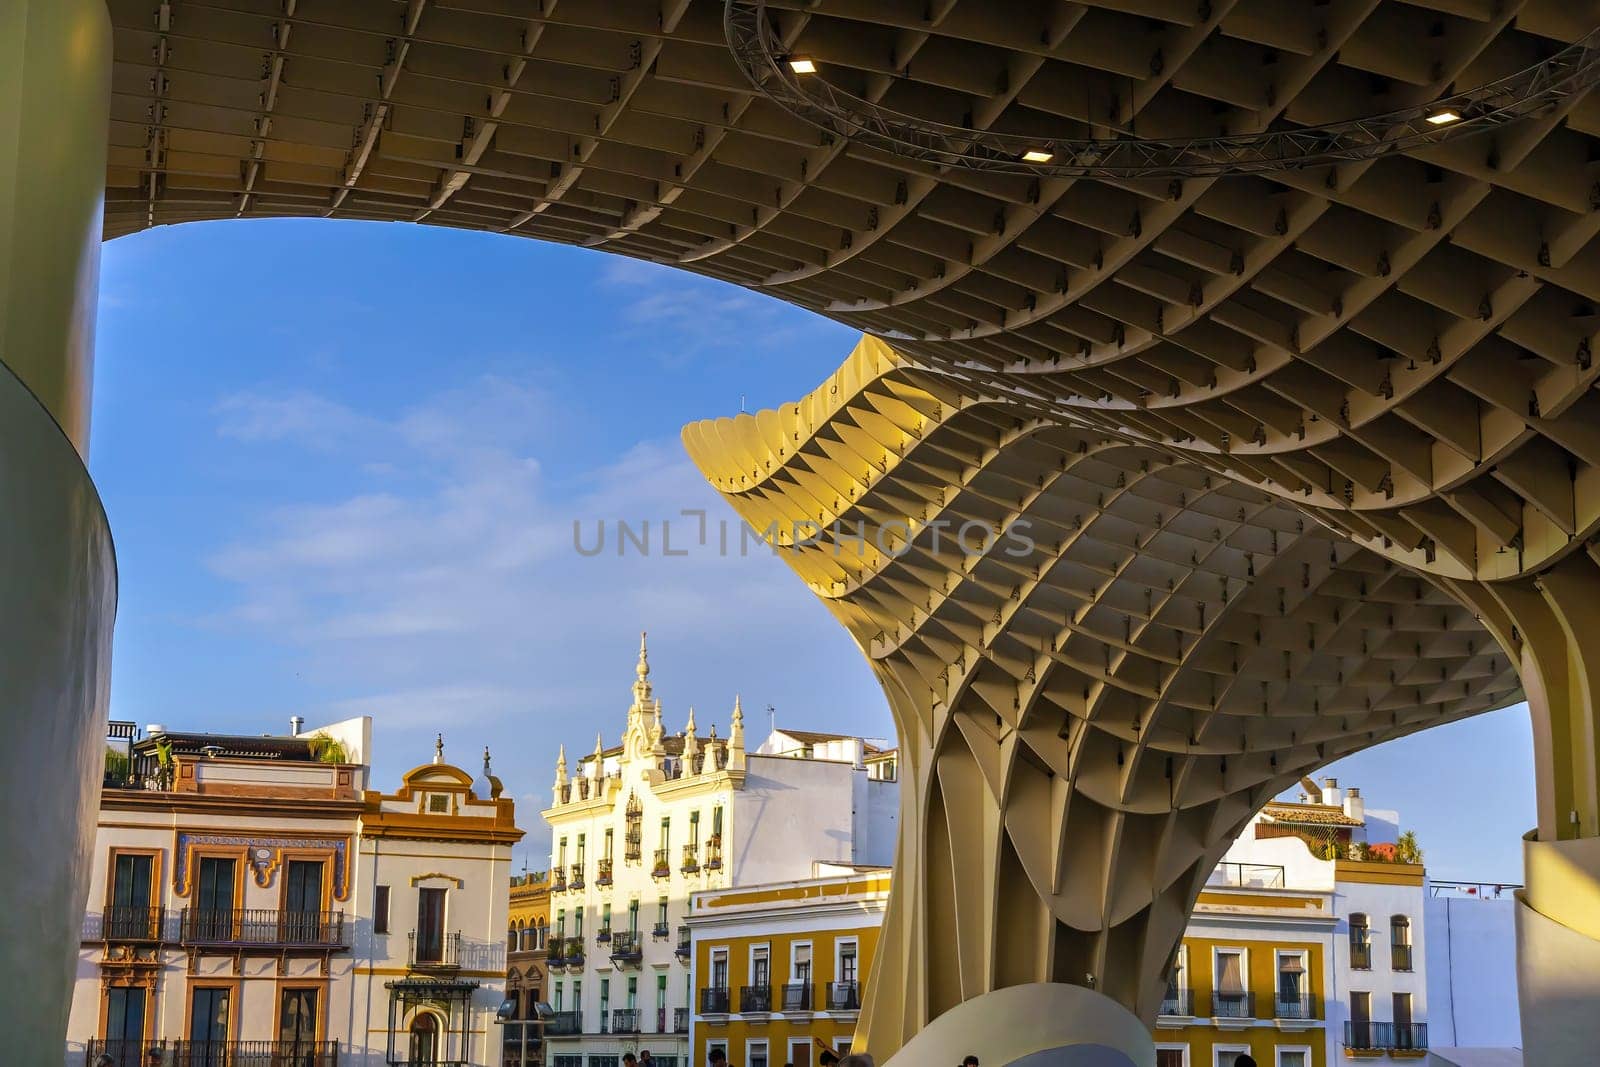 Metropol Parasol wooden structure with Seville city skyline in the old quarter of Seville in Spain at sunset